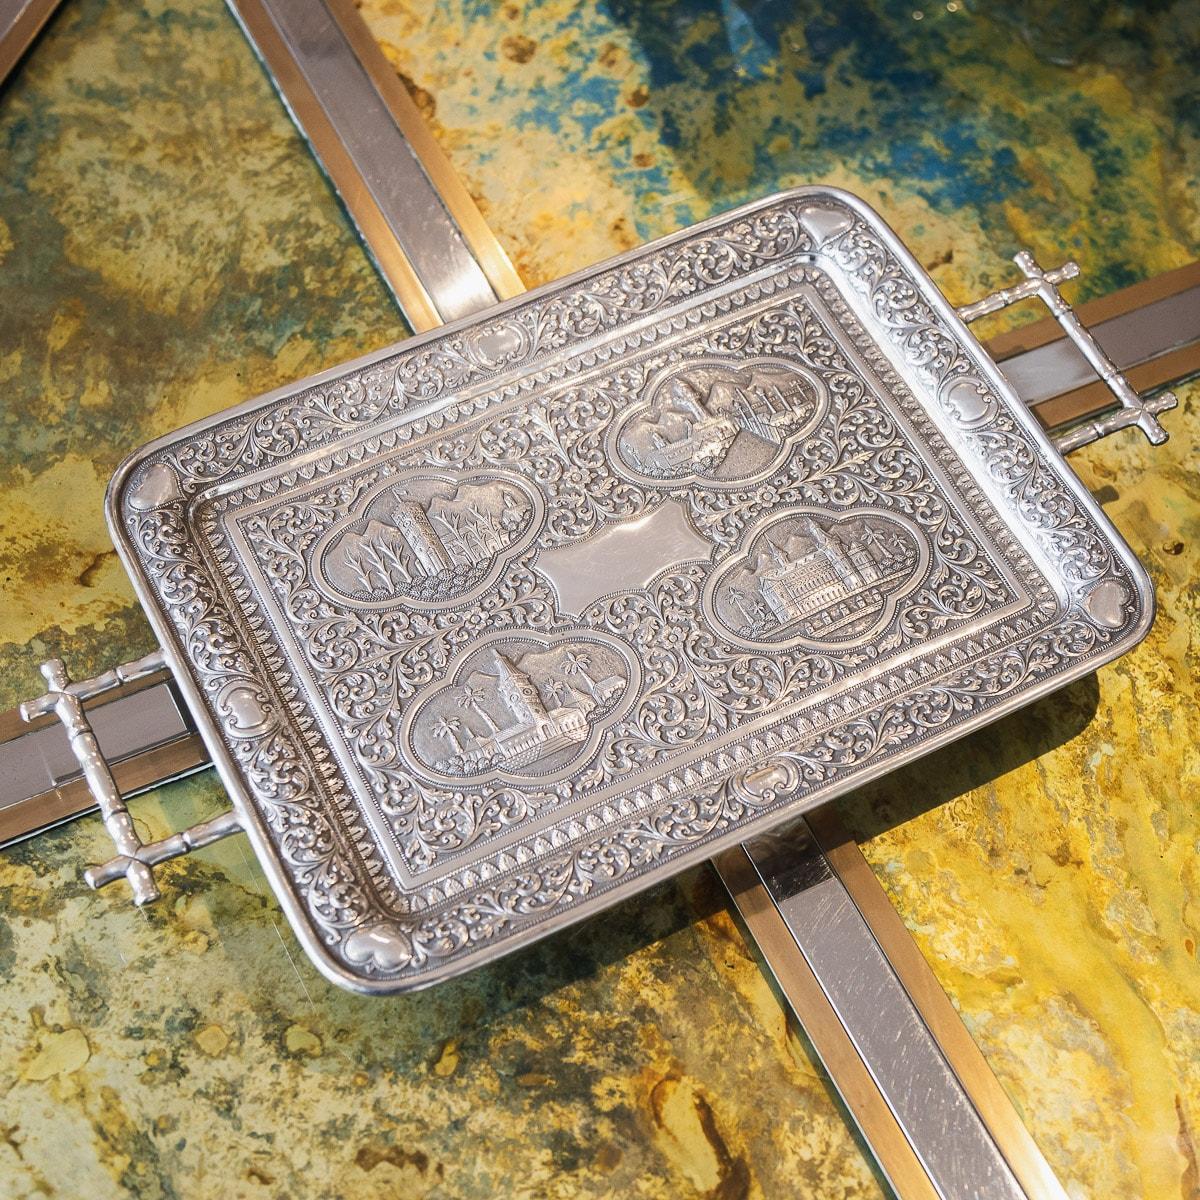 Antique late-19th century Karachi Kutch (Cutch), (Pakistan region) handcrafted solid silver tray, of rectangular form mounted with bamboo shaped handles, finely chased throughout with scrolling leaves and floral patterns on a finely tooled matted